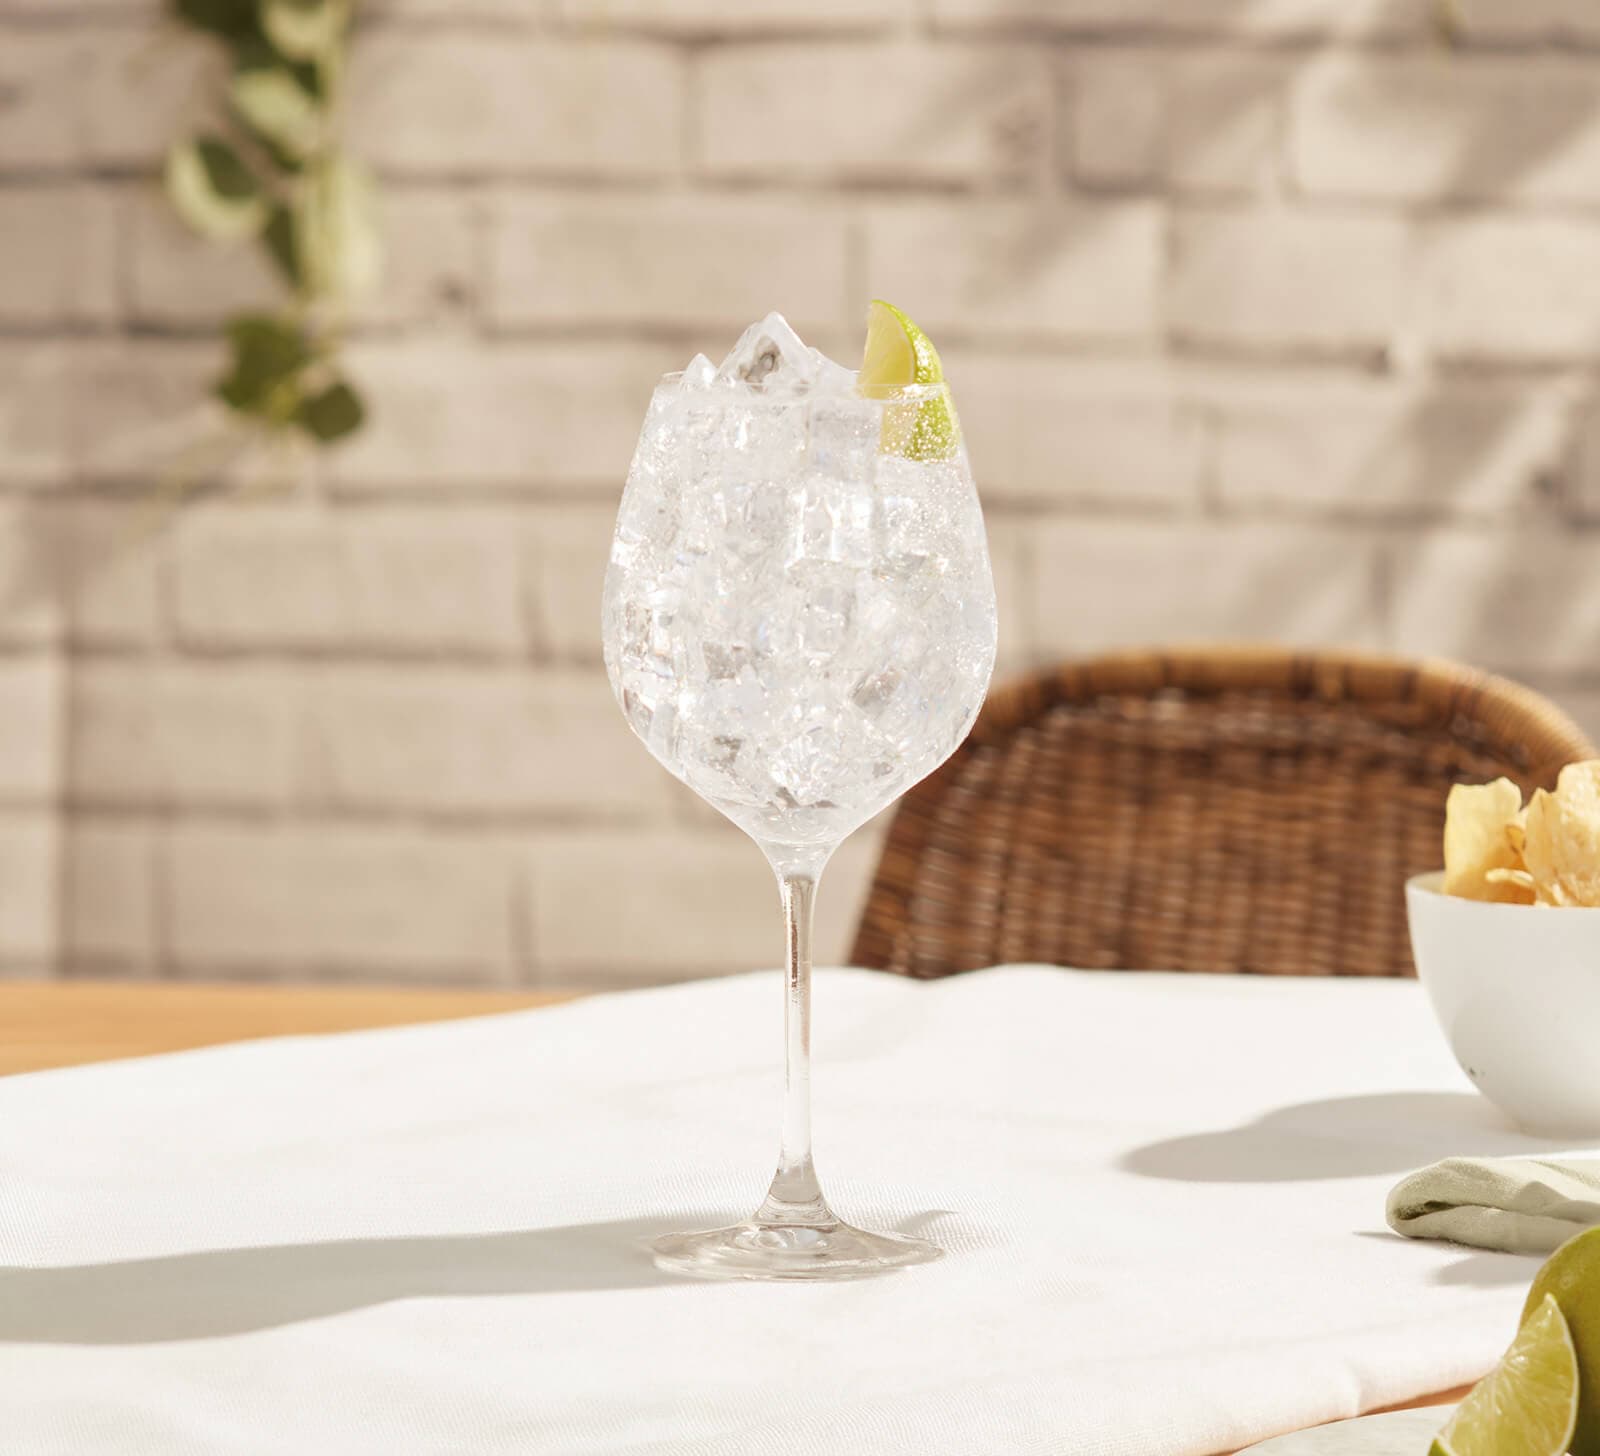 A gin and tonic on a table.